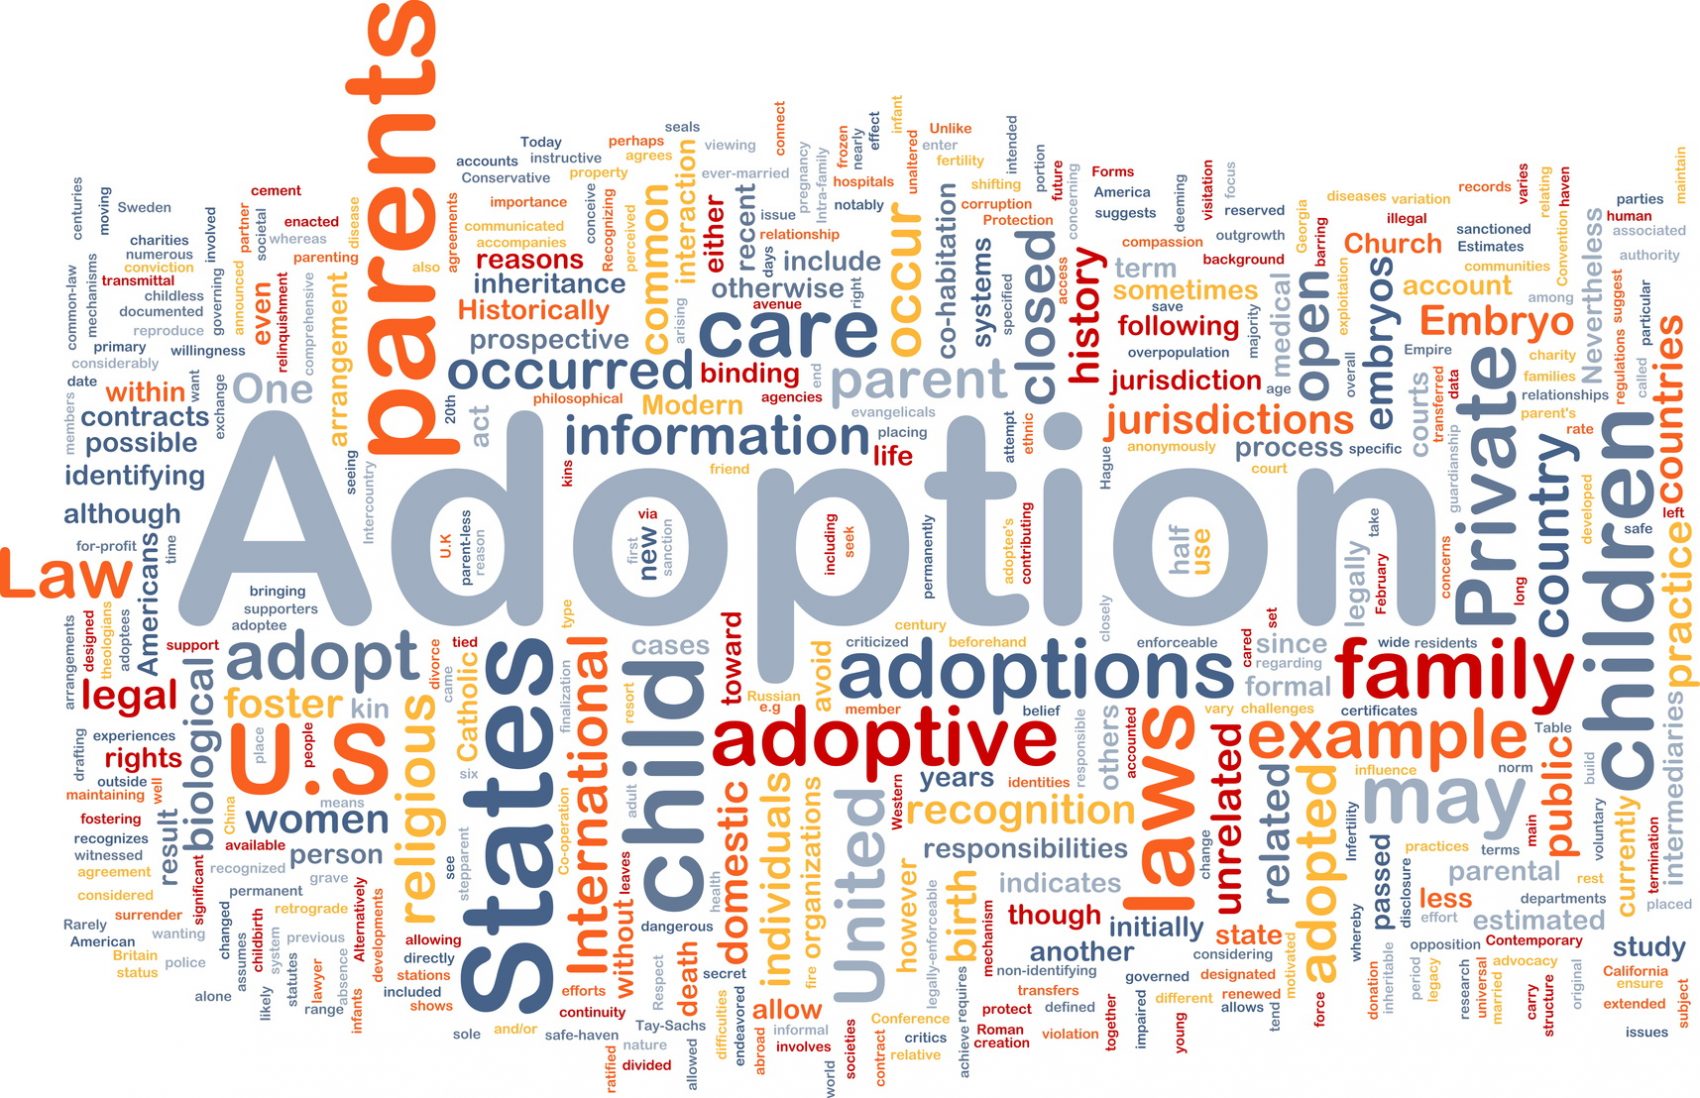 Indiana Among the Top Five States With the Most Adoptions